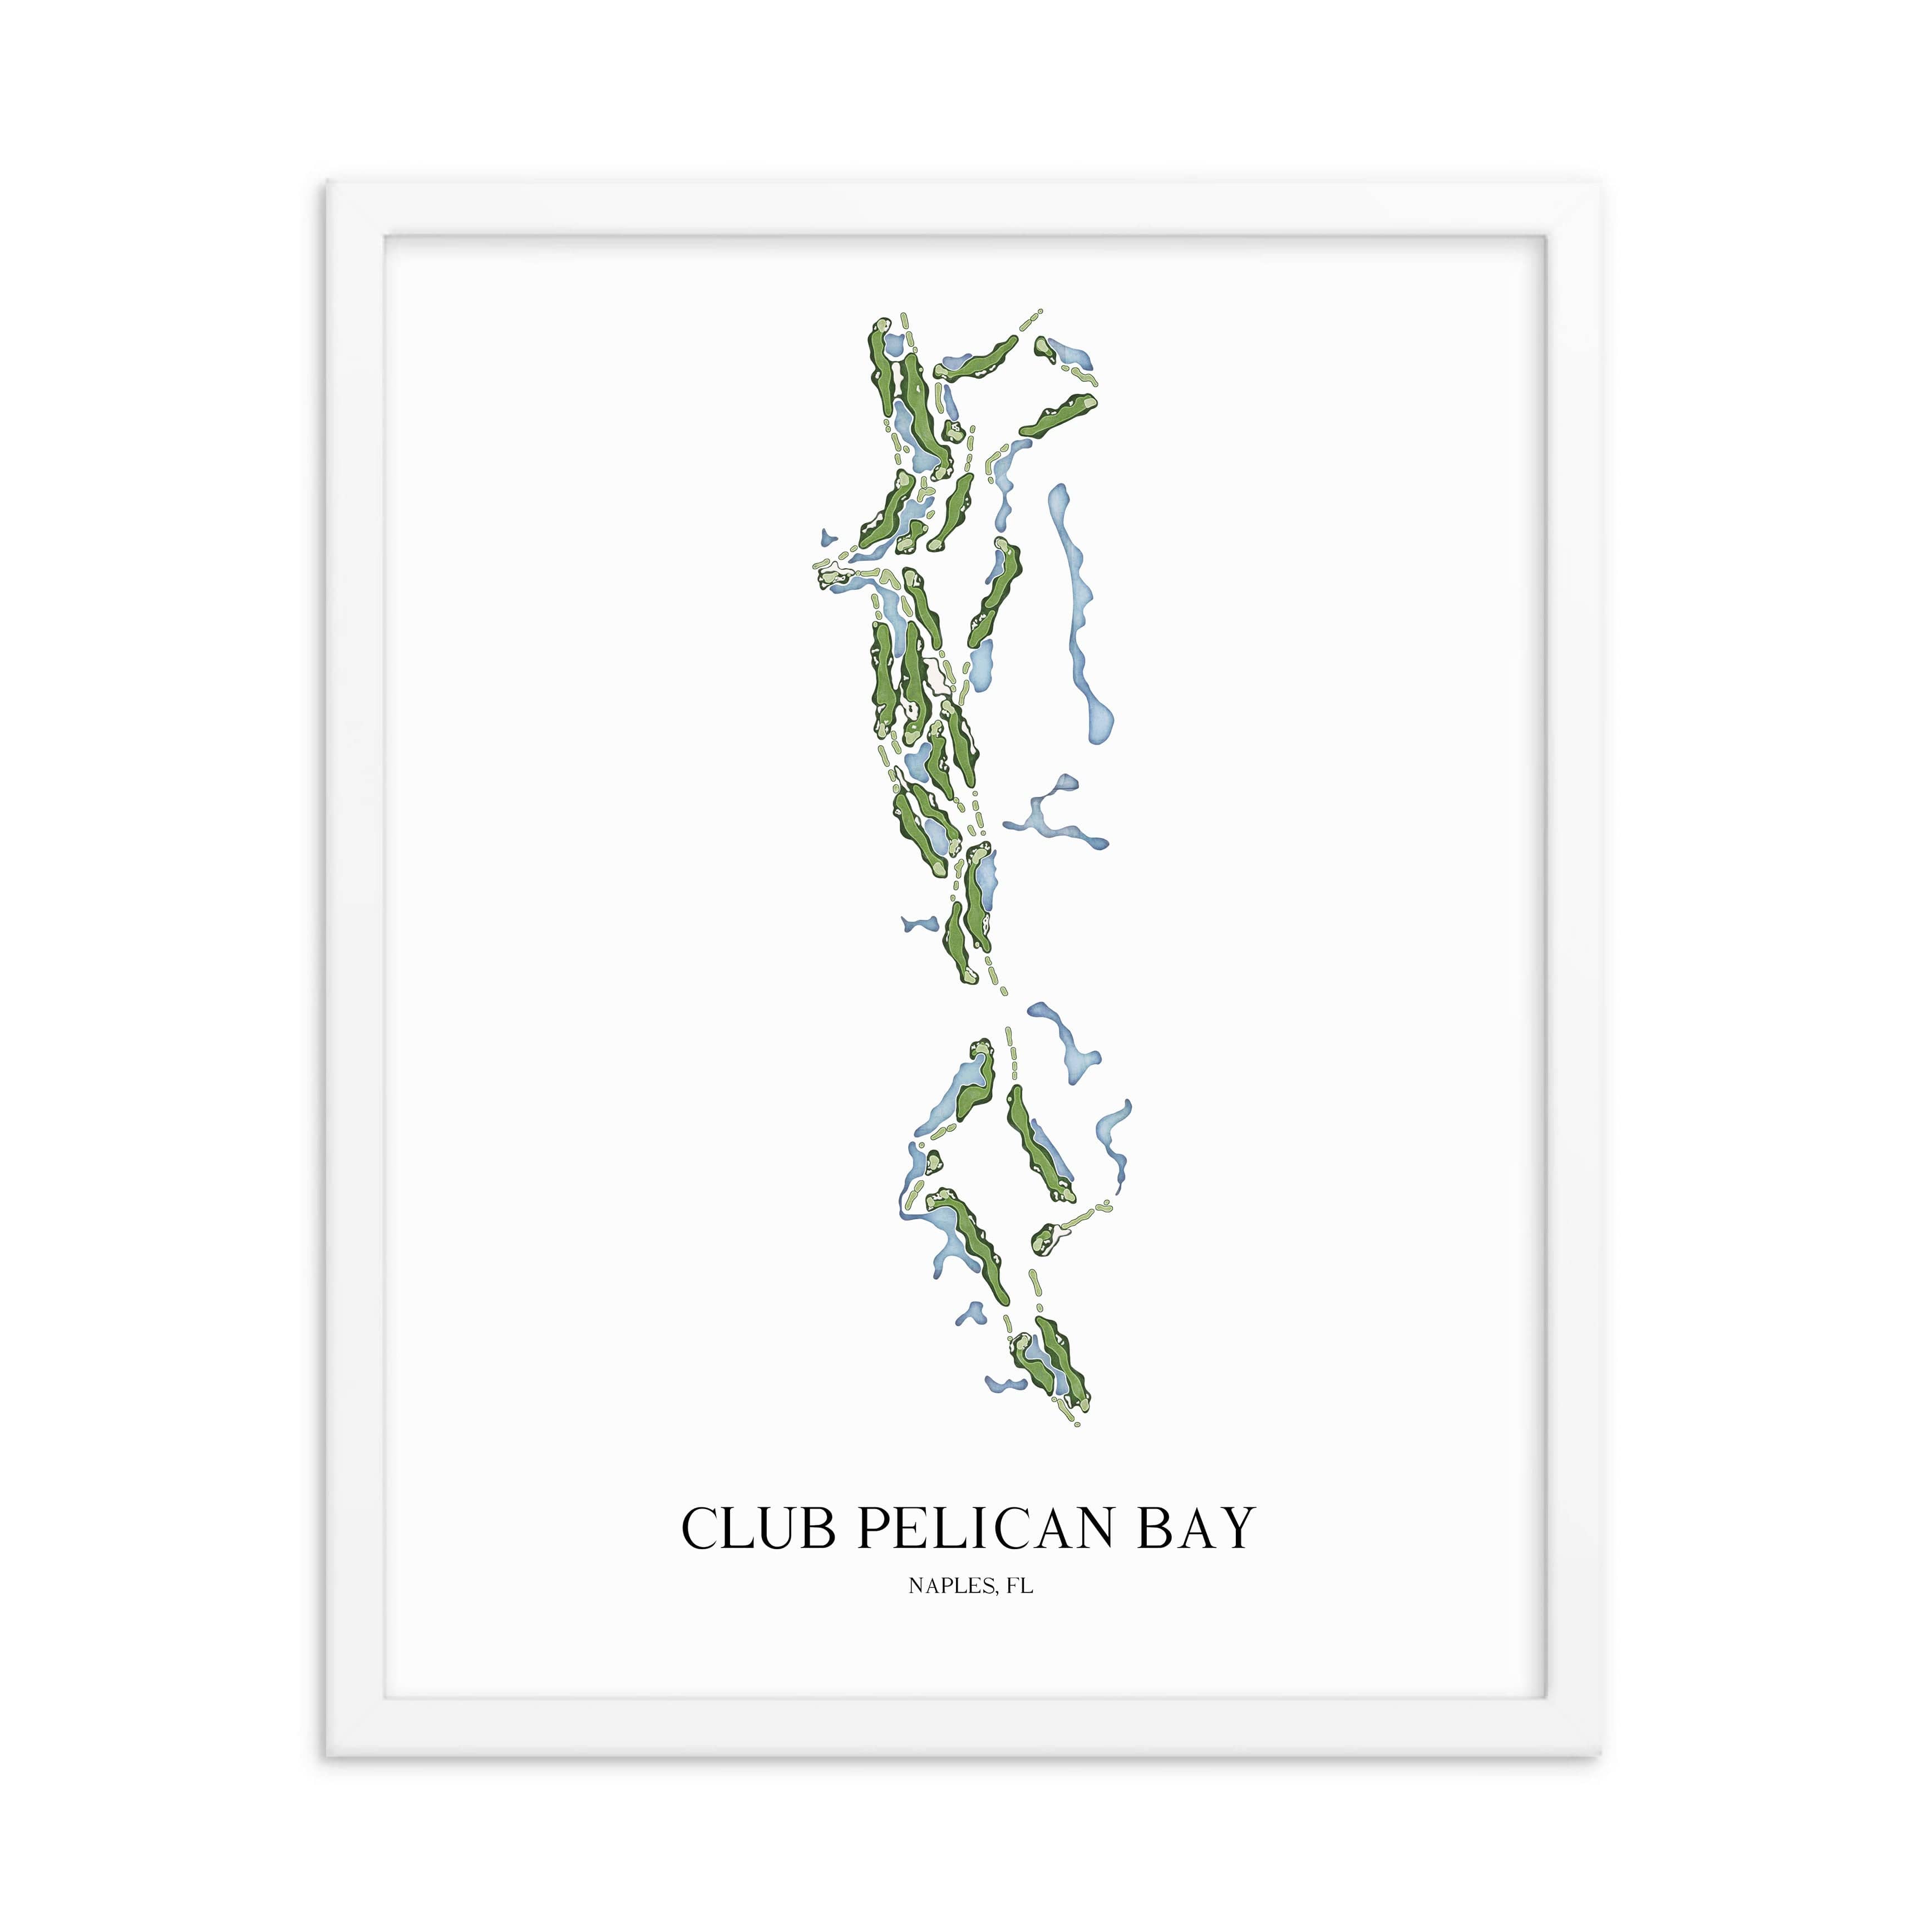 The 19th Hole Golf Shop - Golf Course Prints -  Club Pelican Bay Golf Course Map